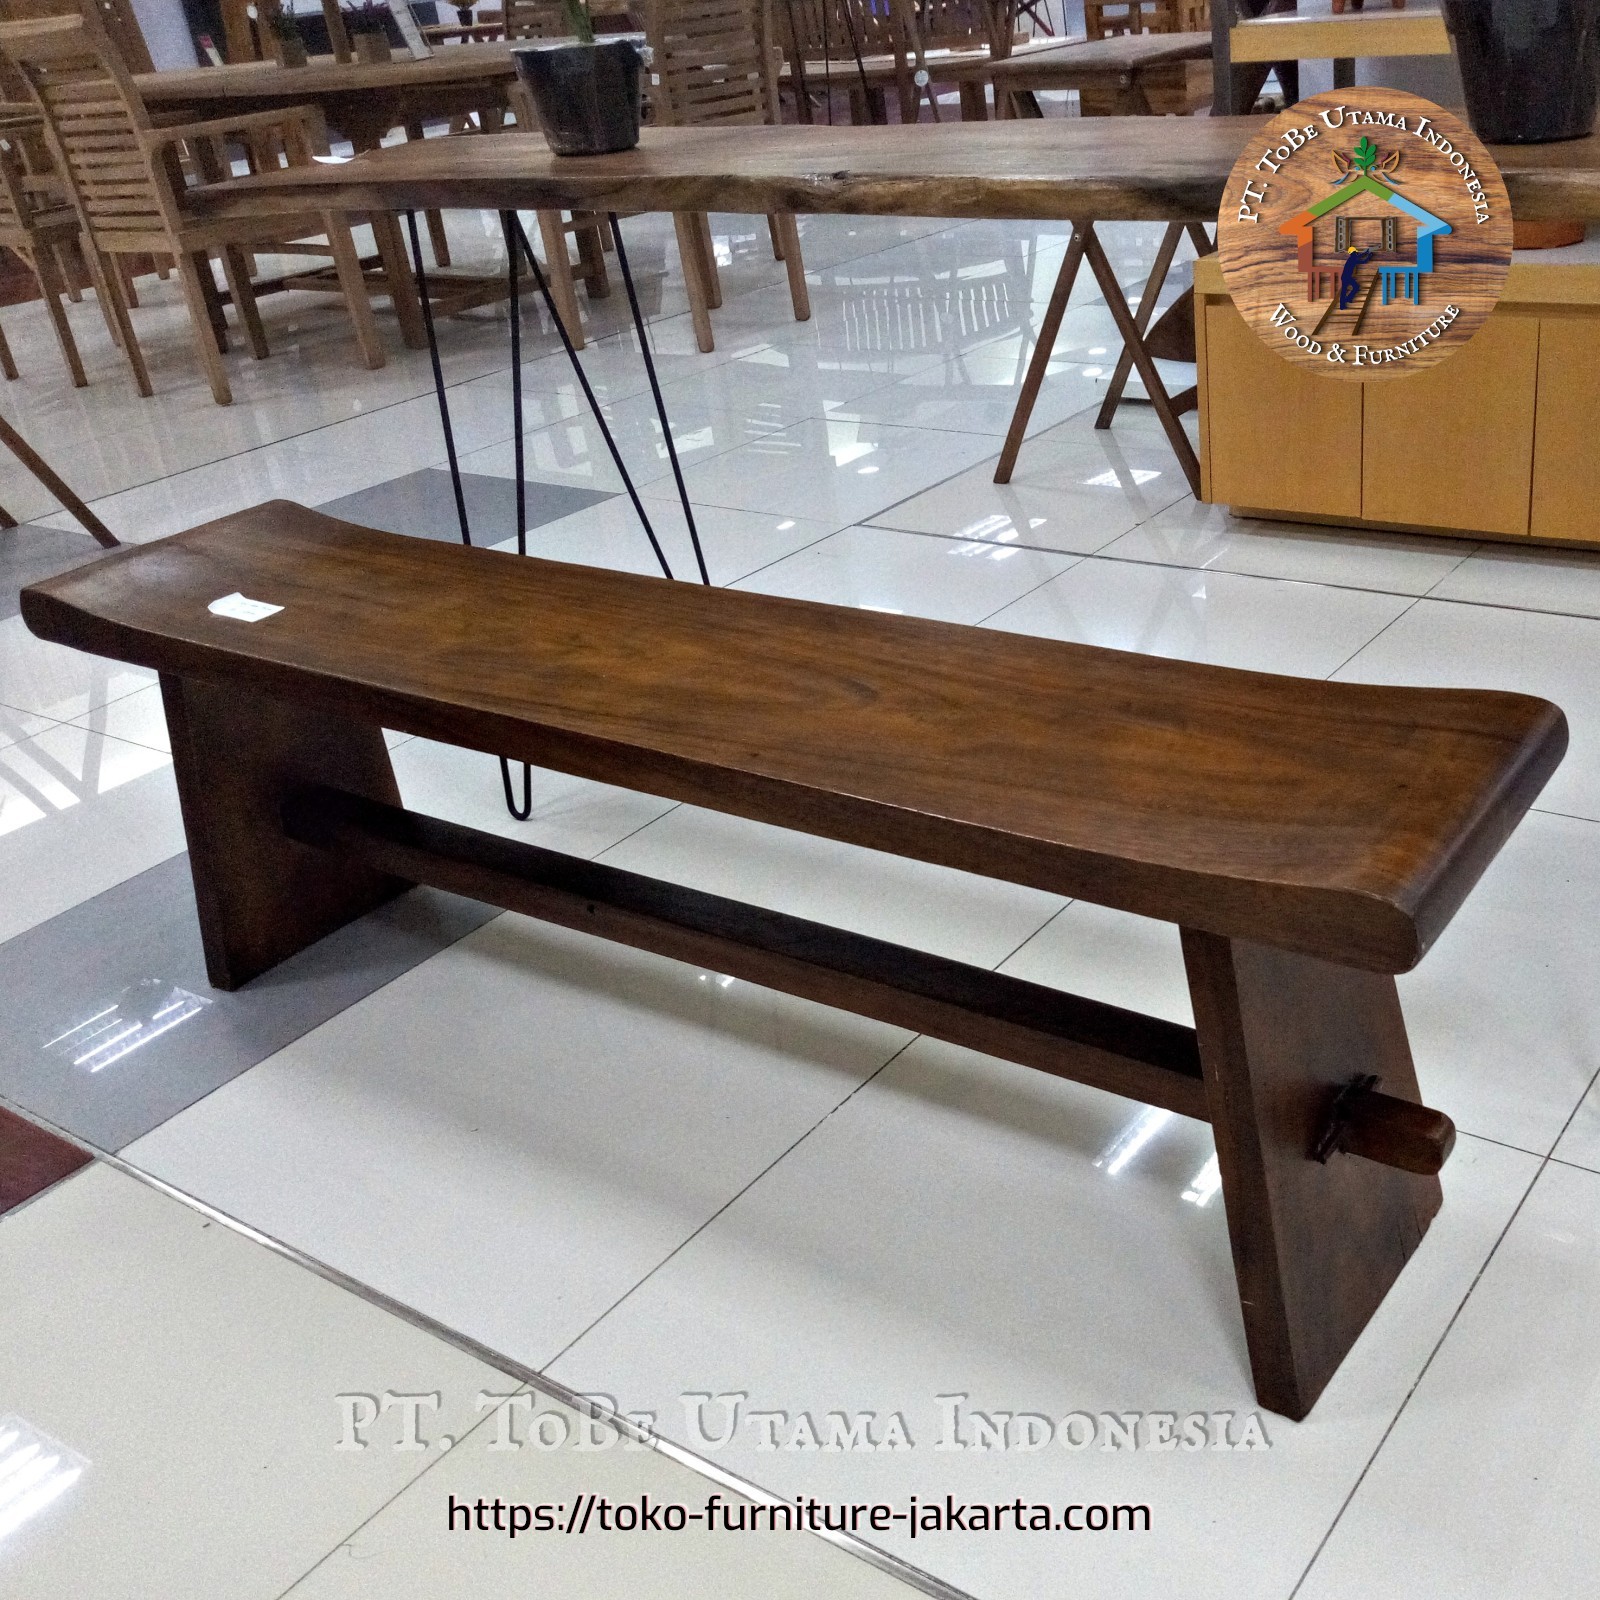 Terrace - Bench: Trembesi Long Bench made of trembesi wood (image 1 of 1).